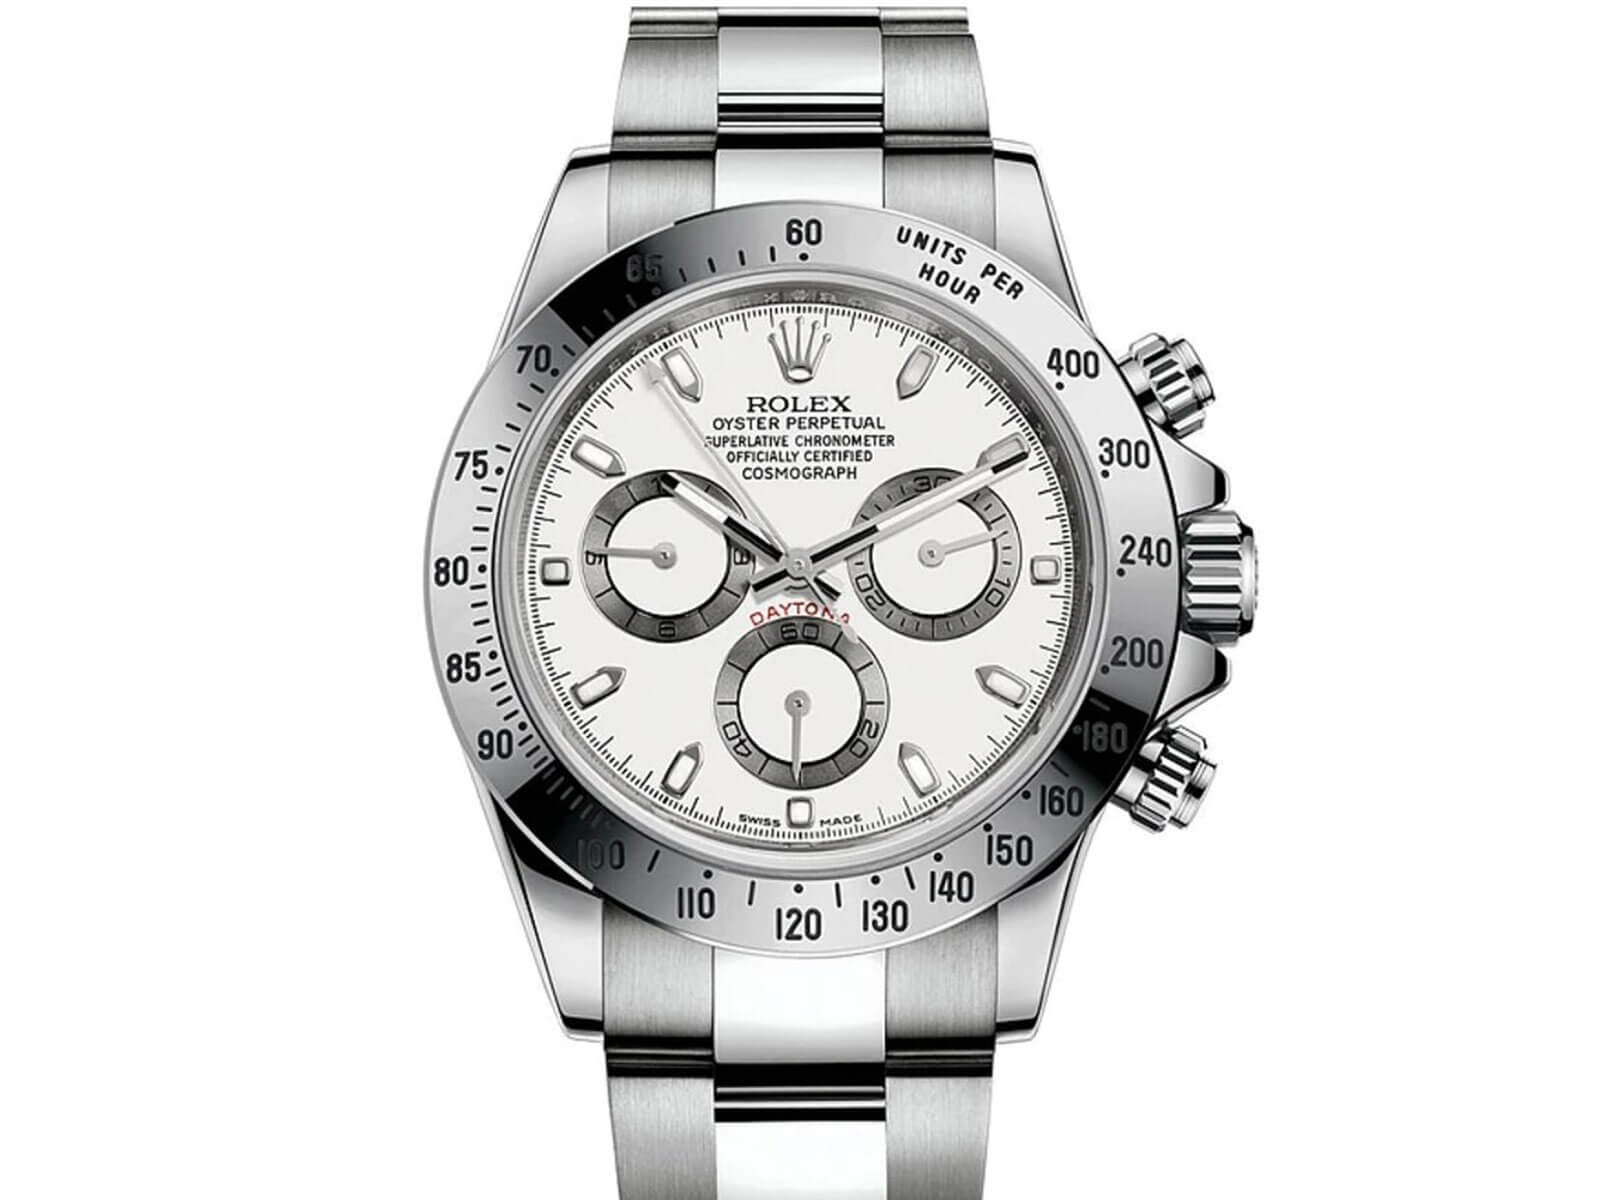 Rolex Daytona 116520 is the first Rolex model with the Parachrom Hairspring